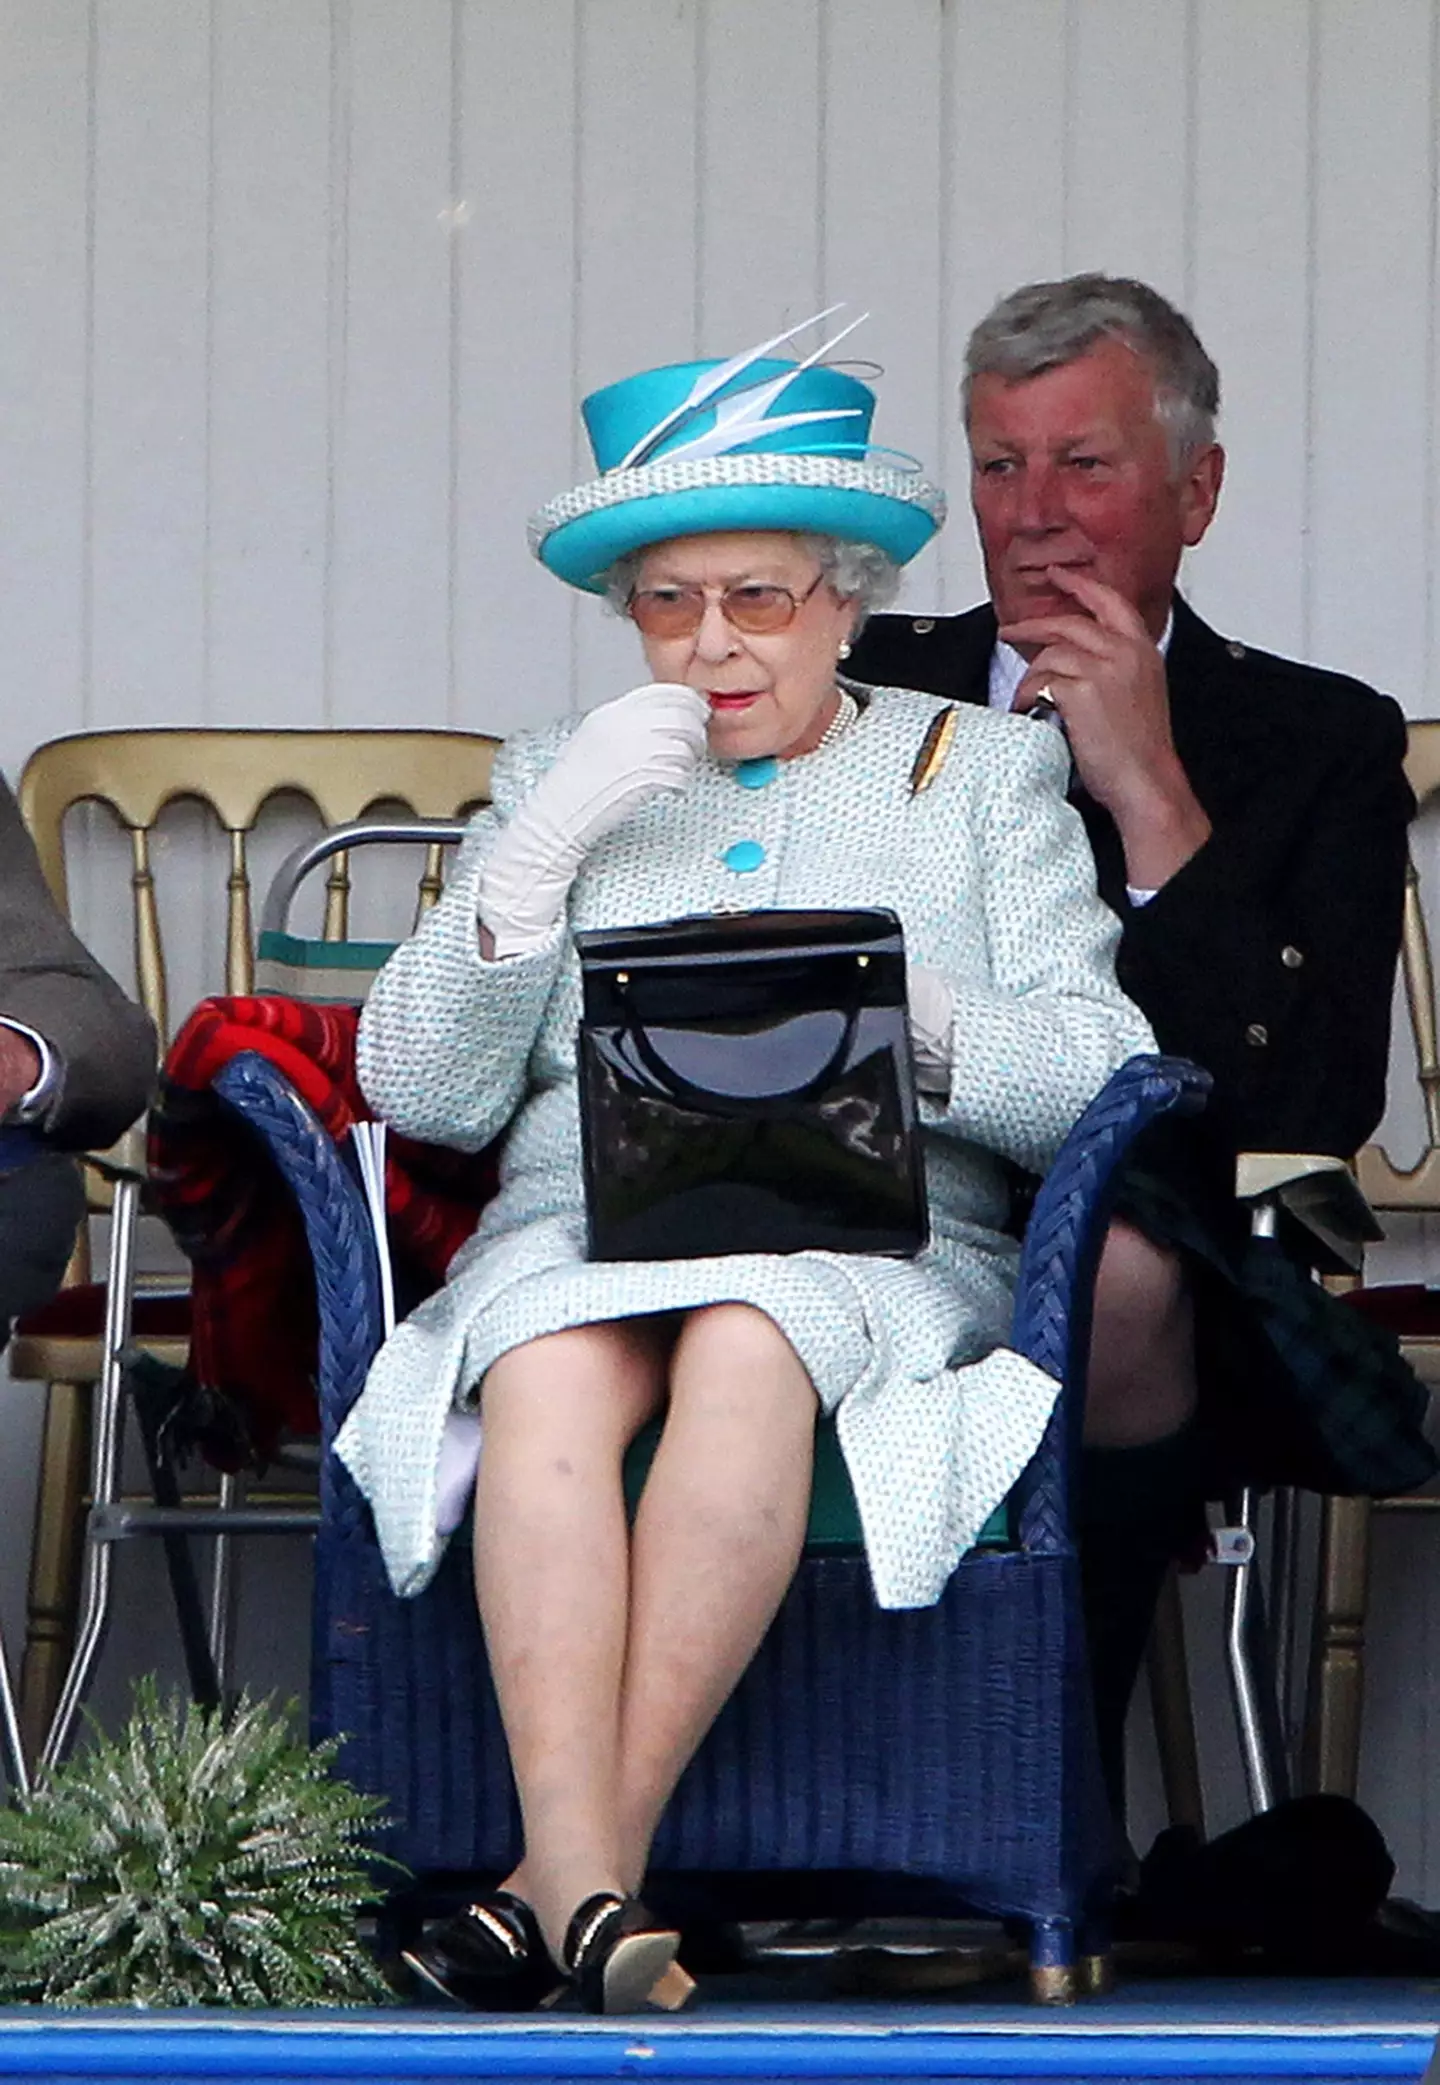 The Queen's subtle way of letting staff know she'd had enough.